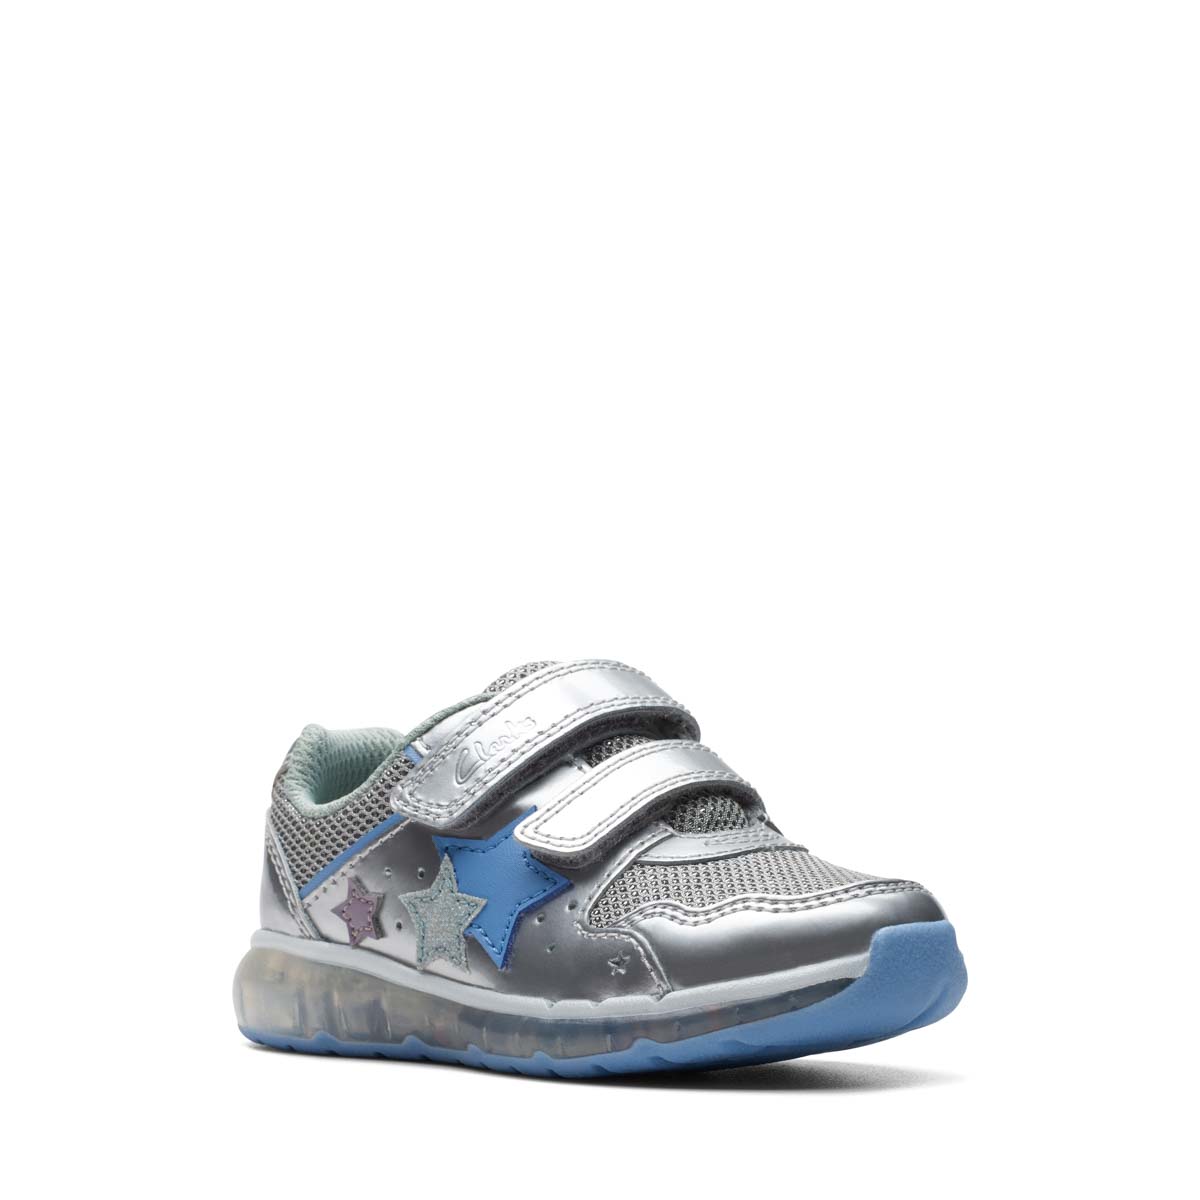 Clarks Spark New T 2V Silver Kids Toddler Girls Trainers 751516F In Size 4 In Plain Silver F Width Fitting Regular Fit